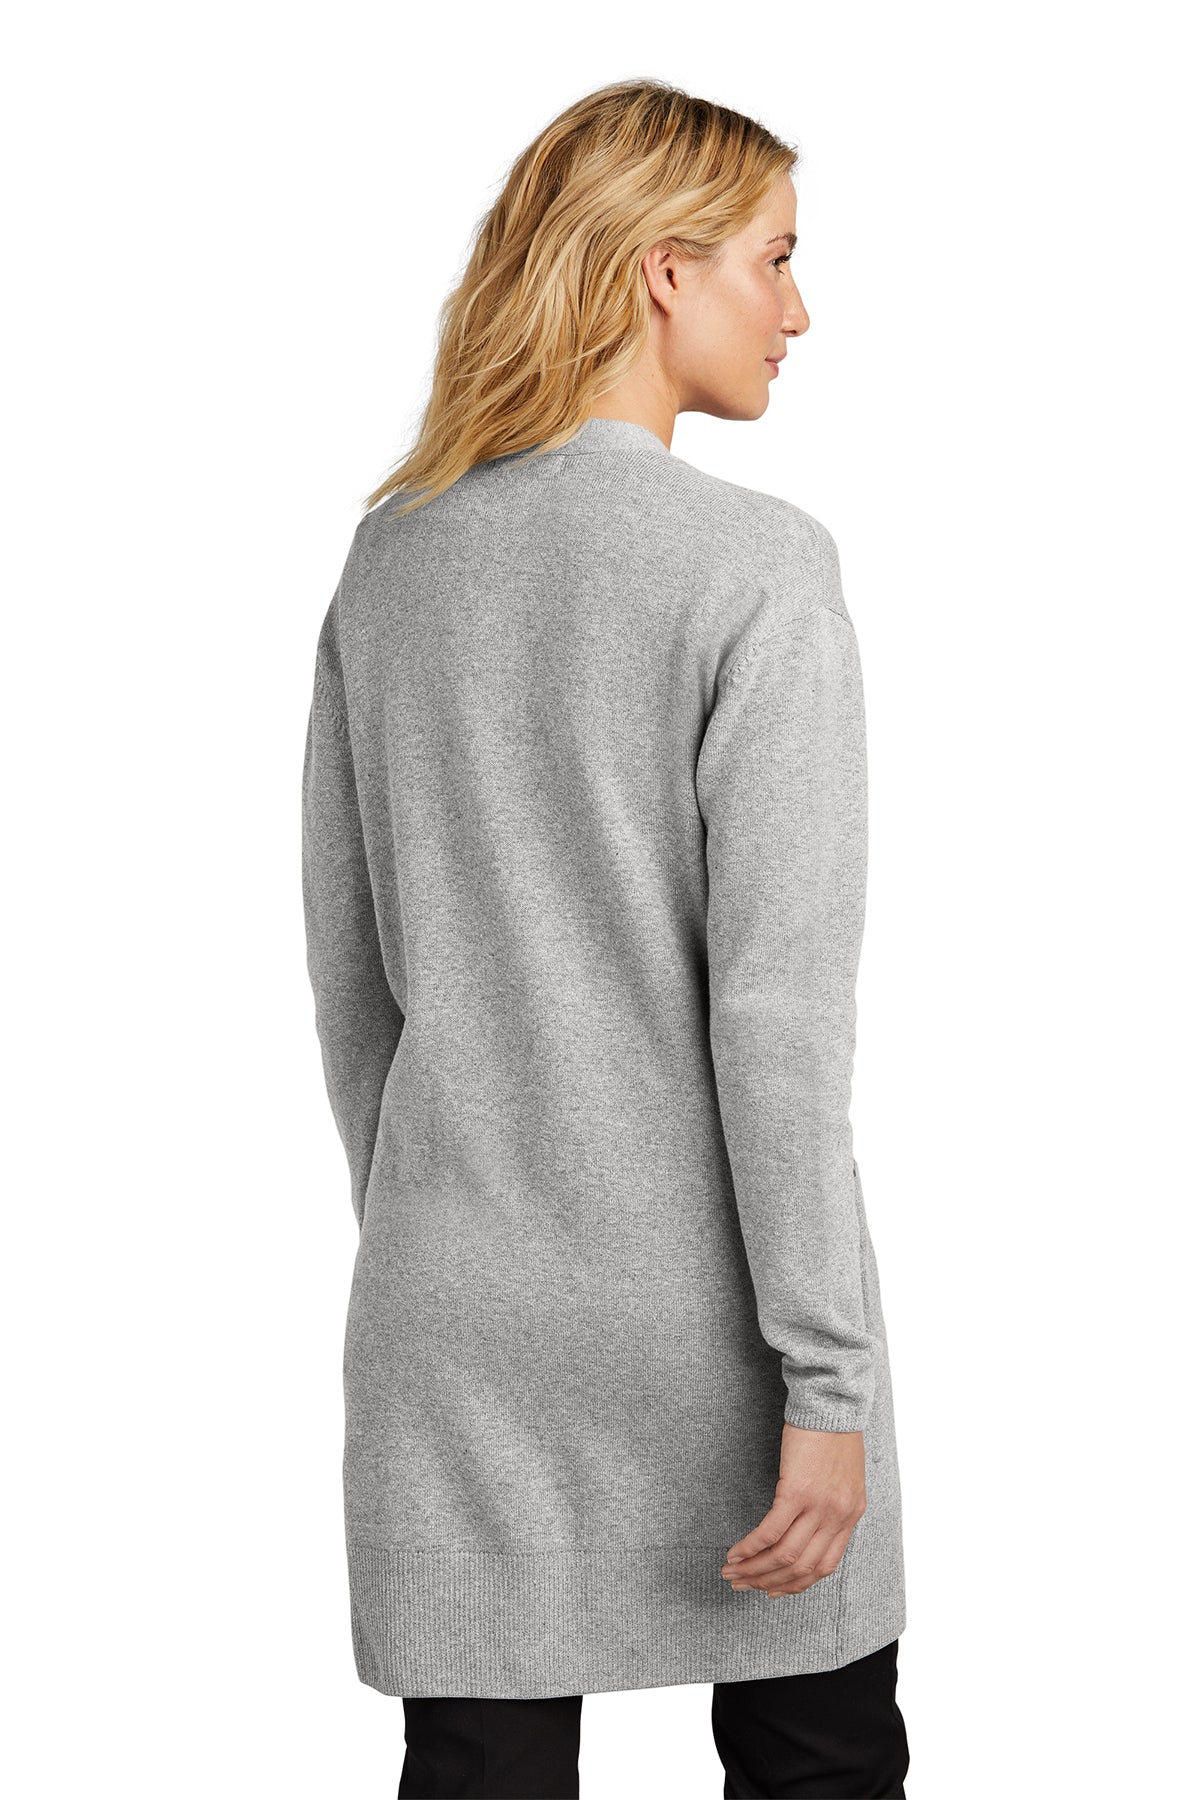 Lydia Open-Front Cardigan Sweater - Gusty Grey